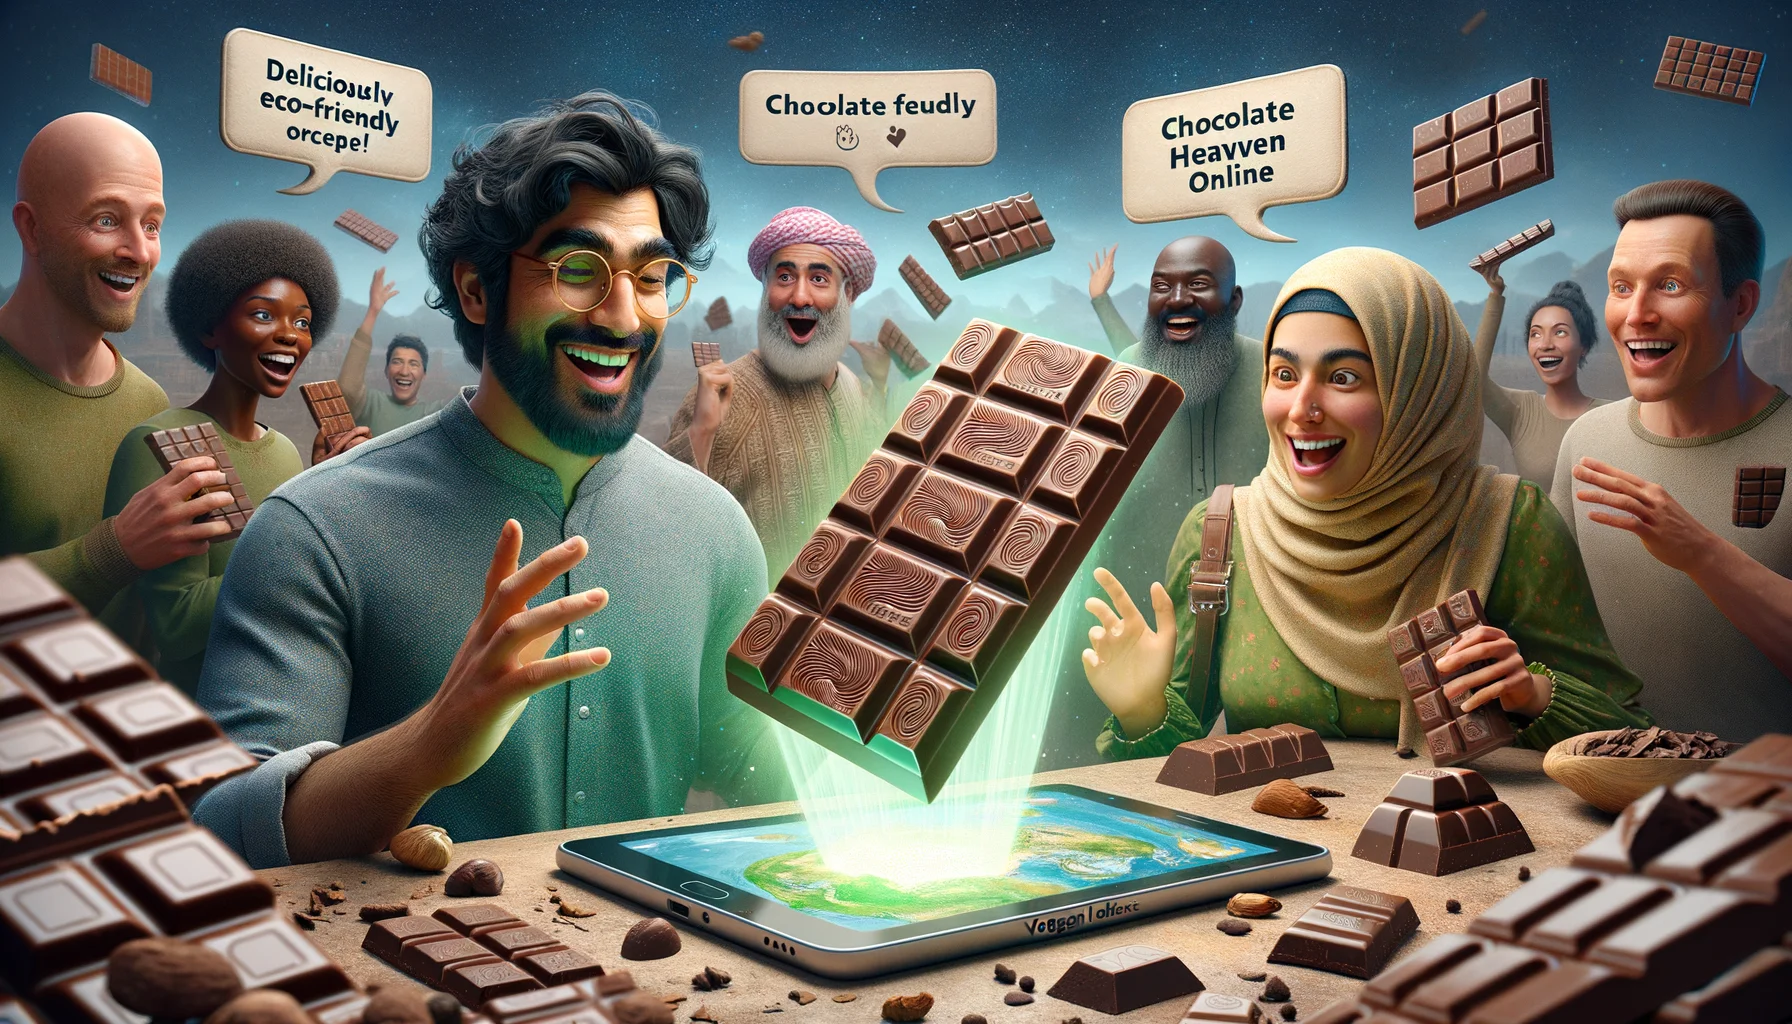 A humorous and realistic scene centered on artisan vegan chocolate bars. The image is set in a utopian world where every chocolate lover's dream comes true. In the scene, two characters of diverse descents, an Asian man and a Middle-Eastern woman, enthusiastically discover the vegan chocolate bars through a digital portal - signifying an online purchase. The bars are artistically crafted, but in a twist of comedy, they've got a few wonky shapes, for instance, one resembles a smiling face. Floating text bubbles around the scene display phrases such as 'Deliciously Eco-Friendly' and 'Chocolate Heaven Online' for an added touch of humor.